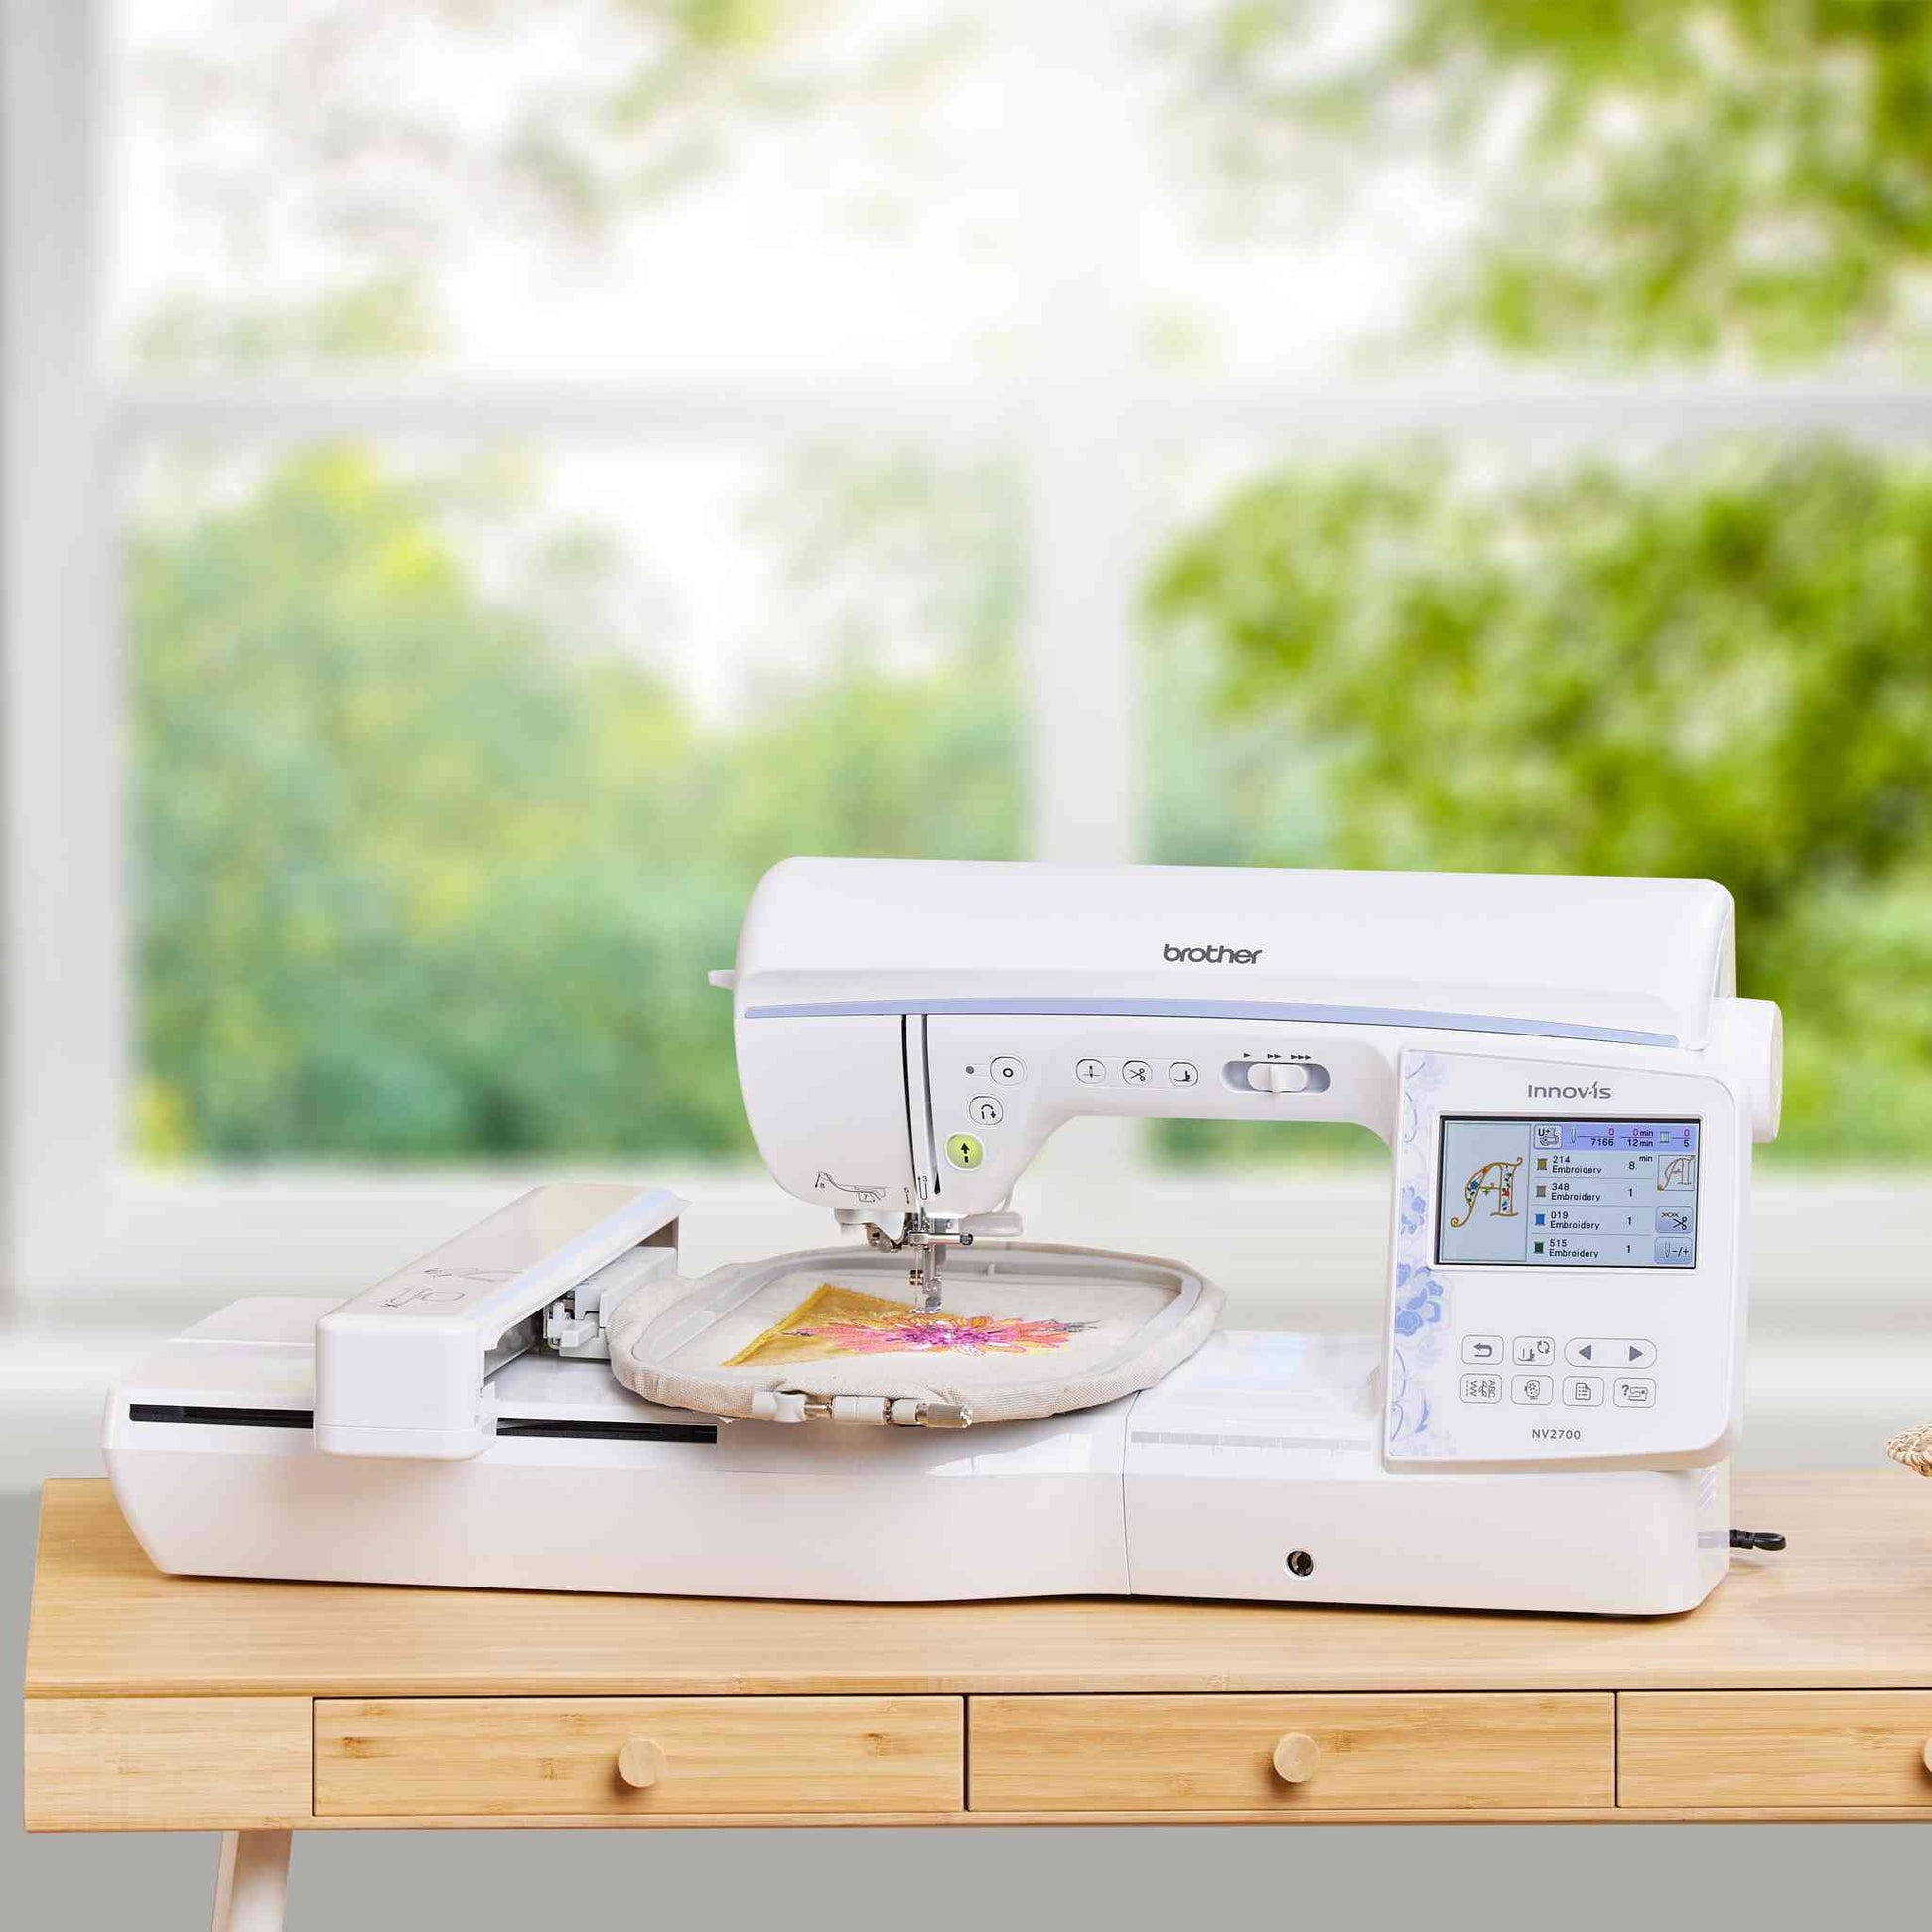 brother nv2700 sewing and embroidery machine with embroidery unit on a studio table